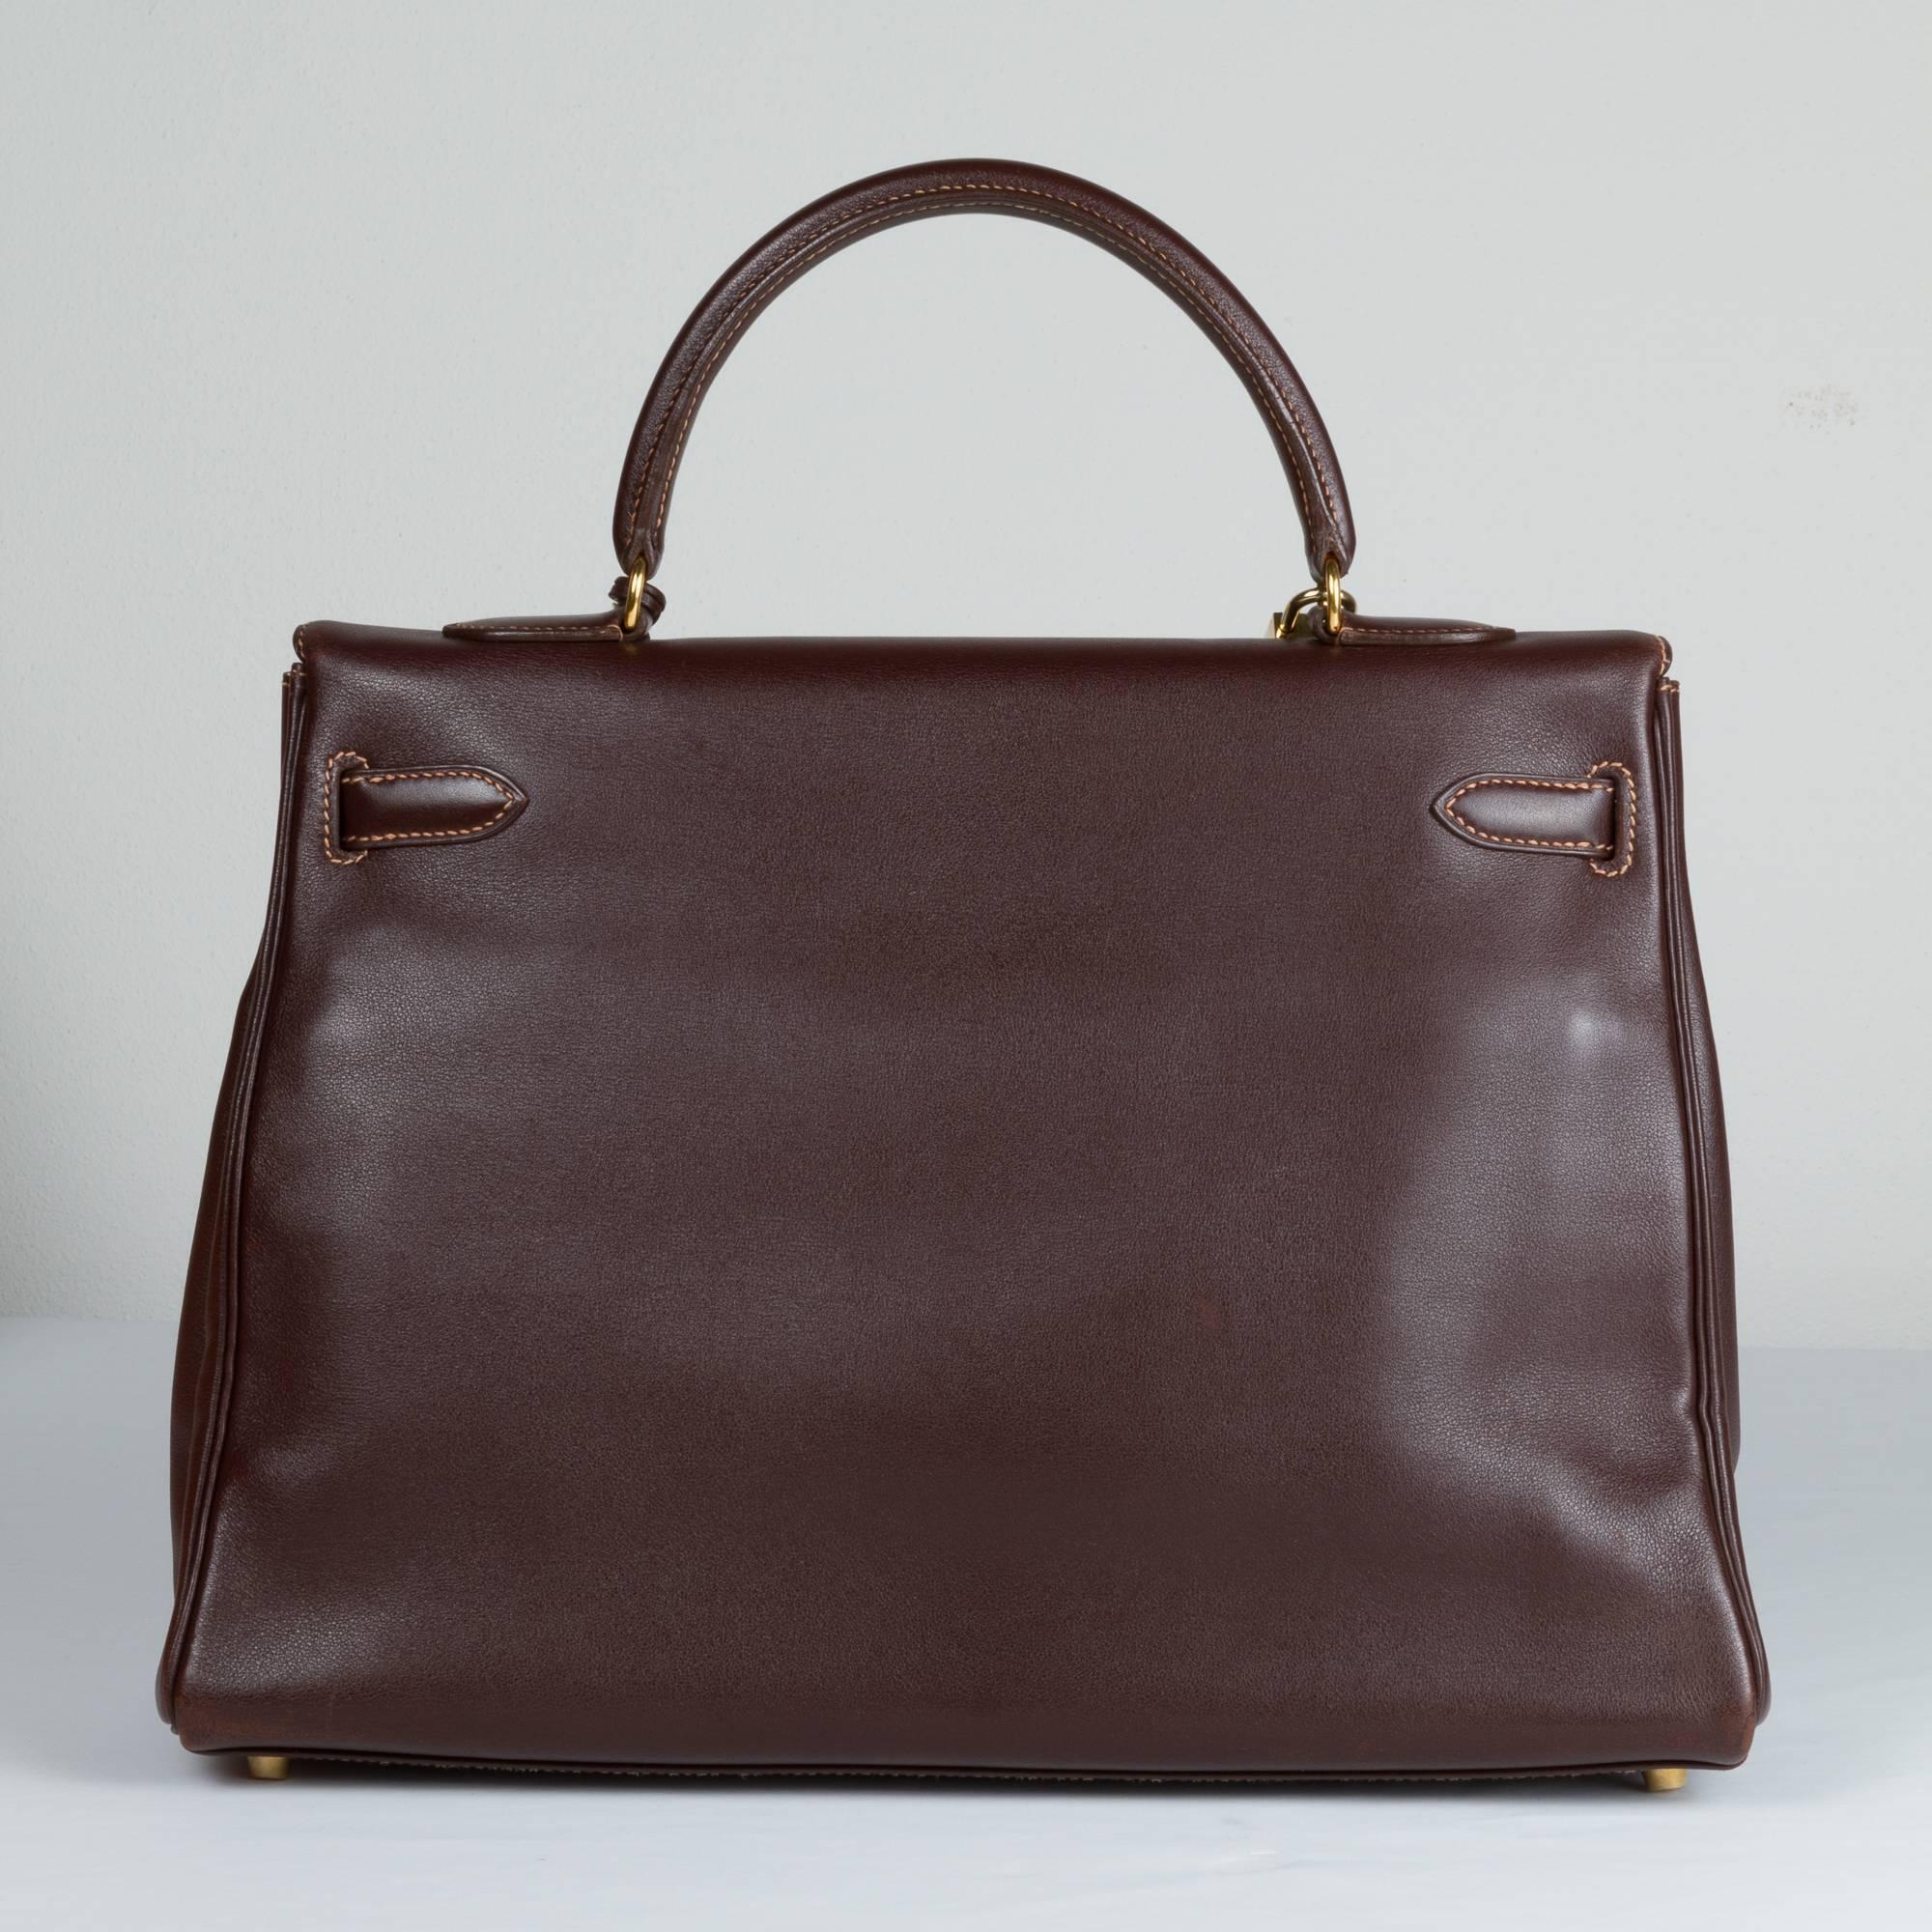 Kelly Hermes in swift leather brown chocolate.
Golden hardwares.
The bag comes with its dustbag, shoulder belt, clochette, padlock and keys.
"A" letter in the square, year 1997.

Very good conditions.
